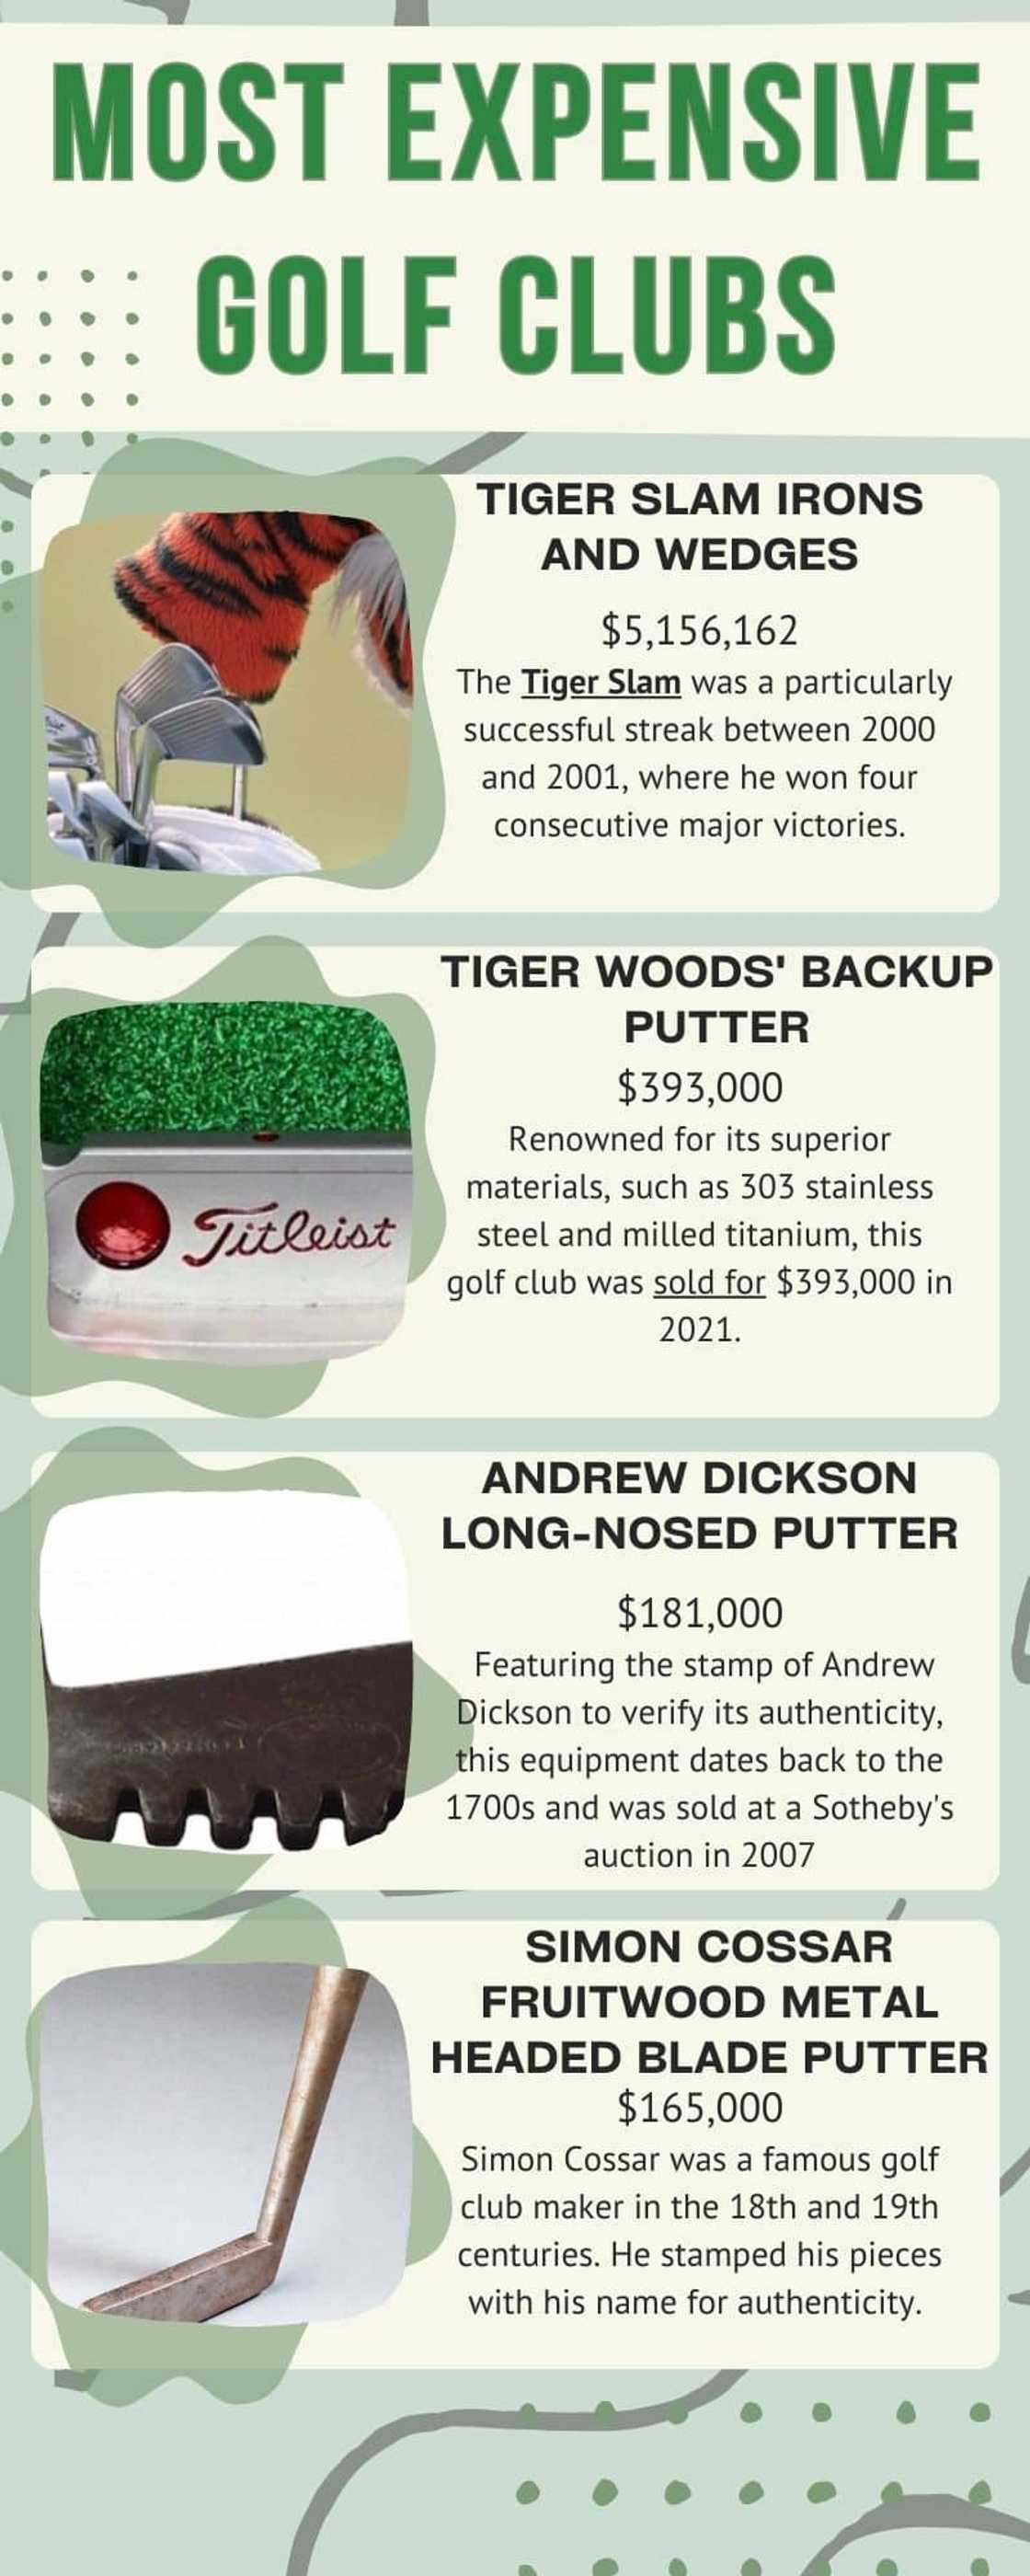 The most expensive golf clubs